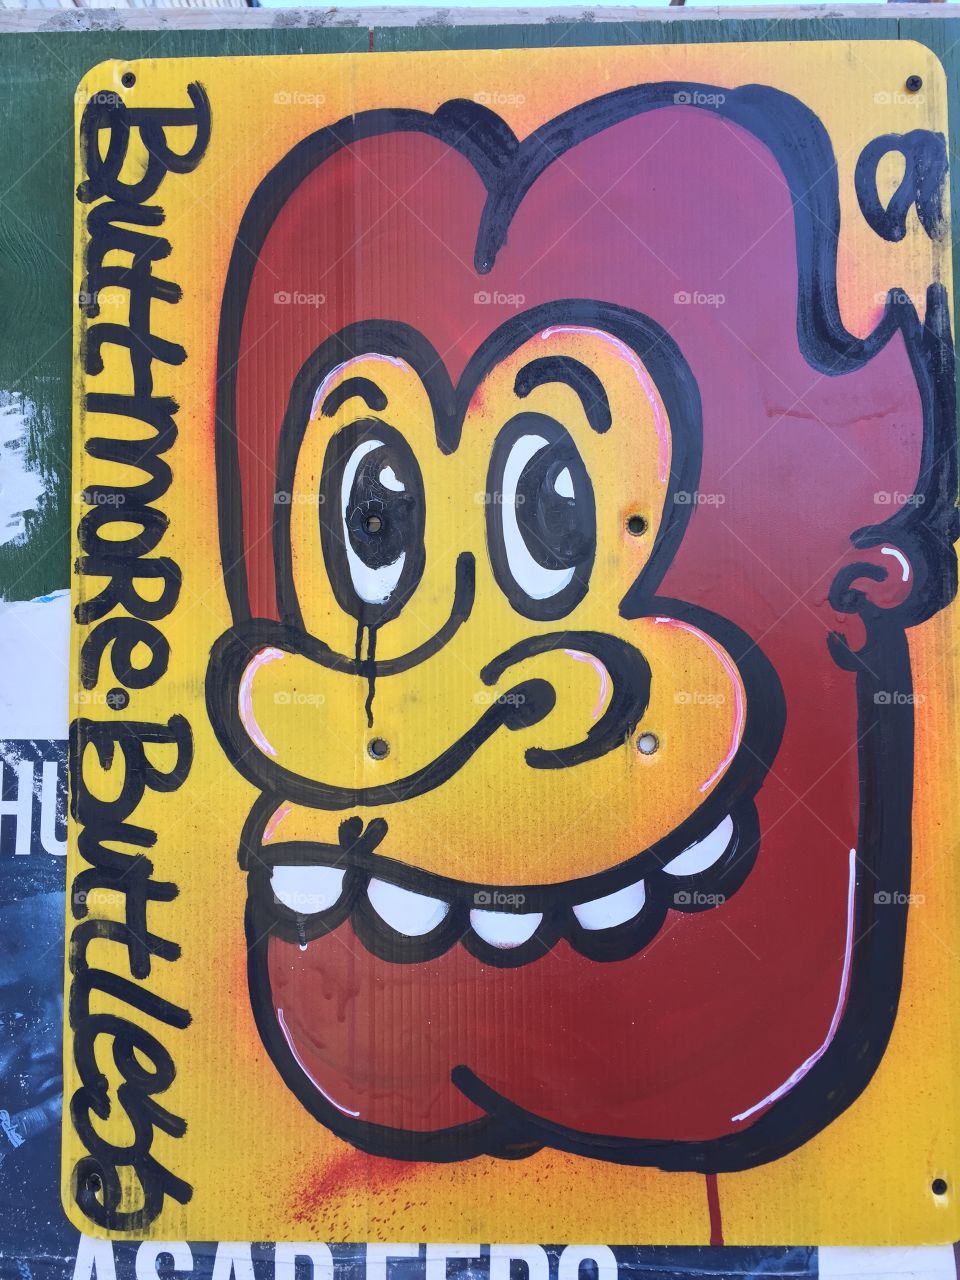 Yellow and brown graffiti sprayed on top of a construction citing of a lion/make smiling face showing humorous teeth and big eyes. Great retro style . Art at is finest . Graffiti illustration.